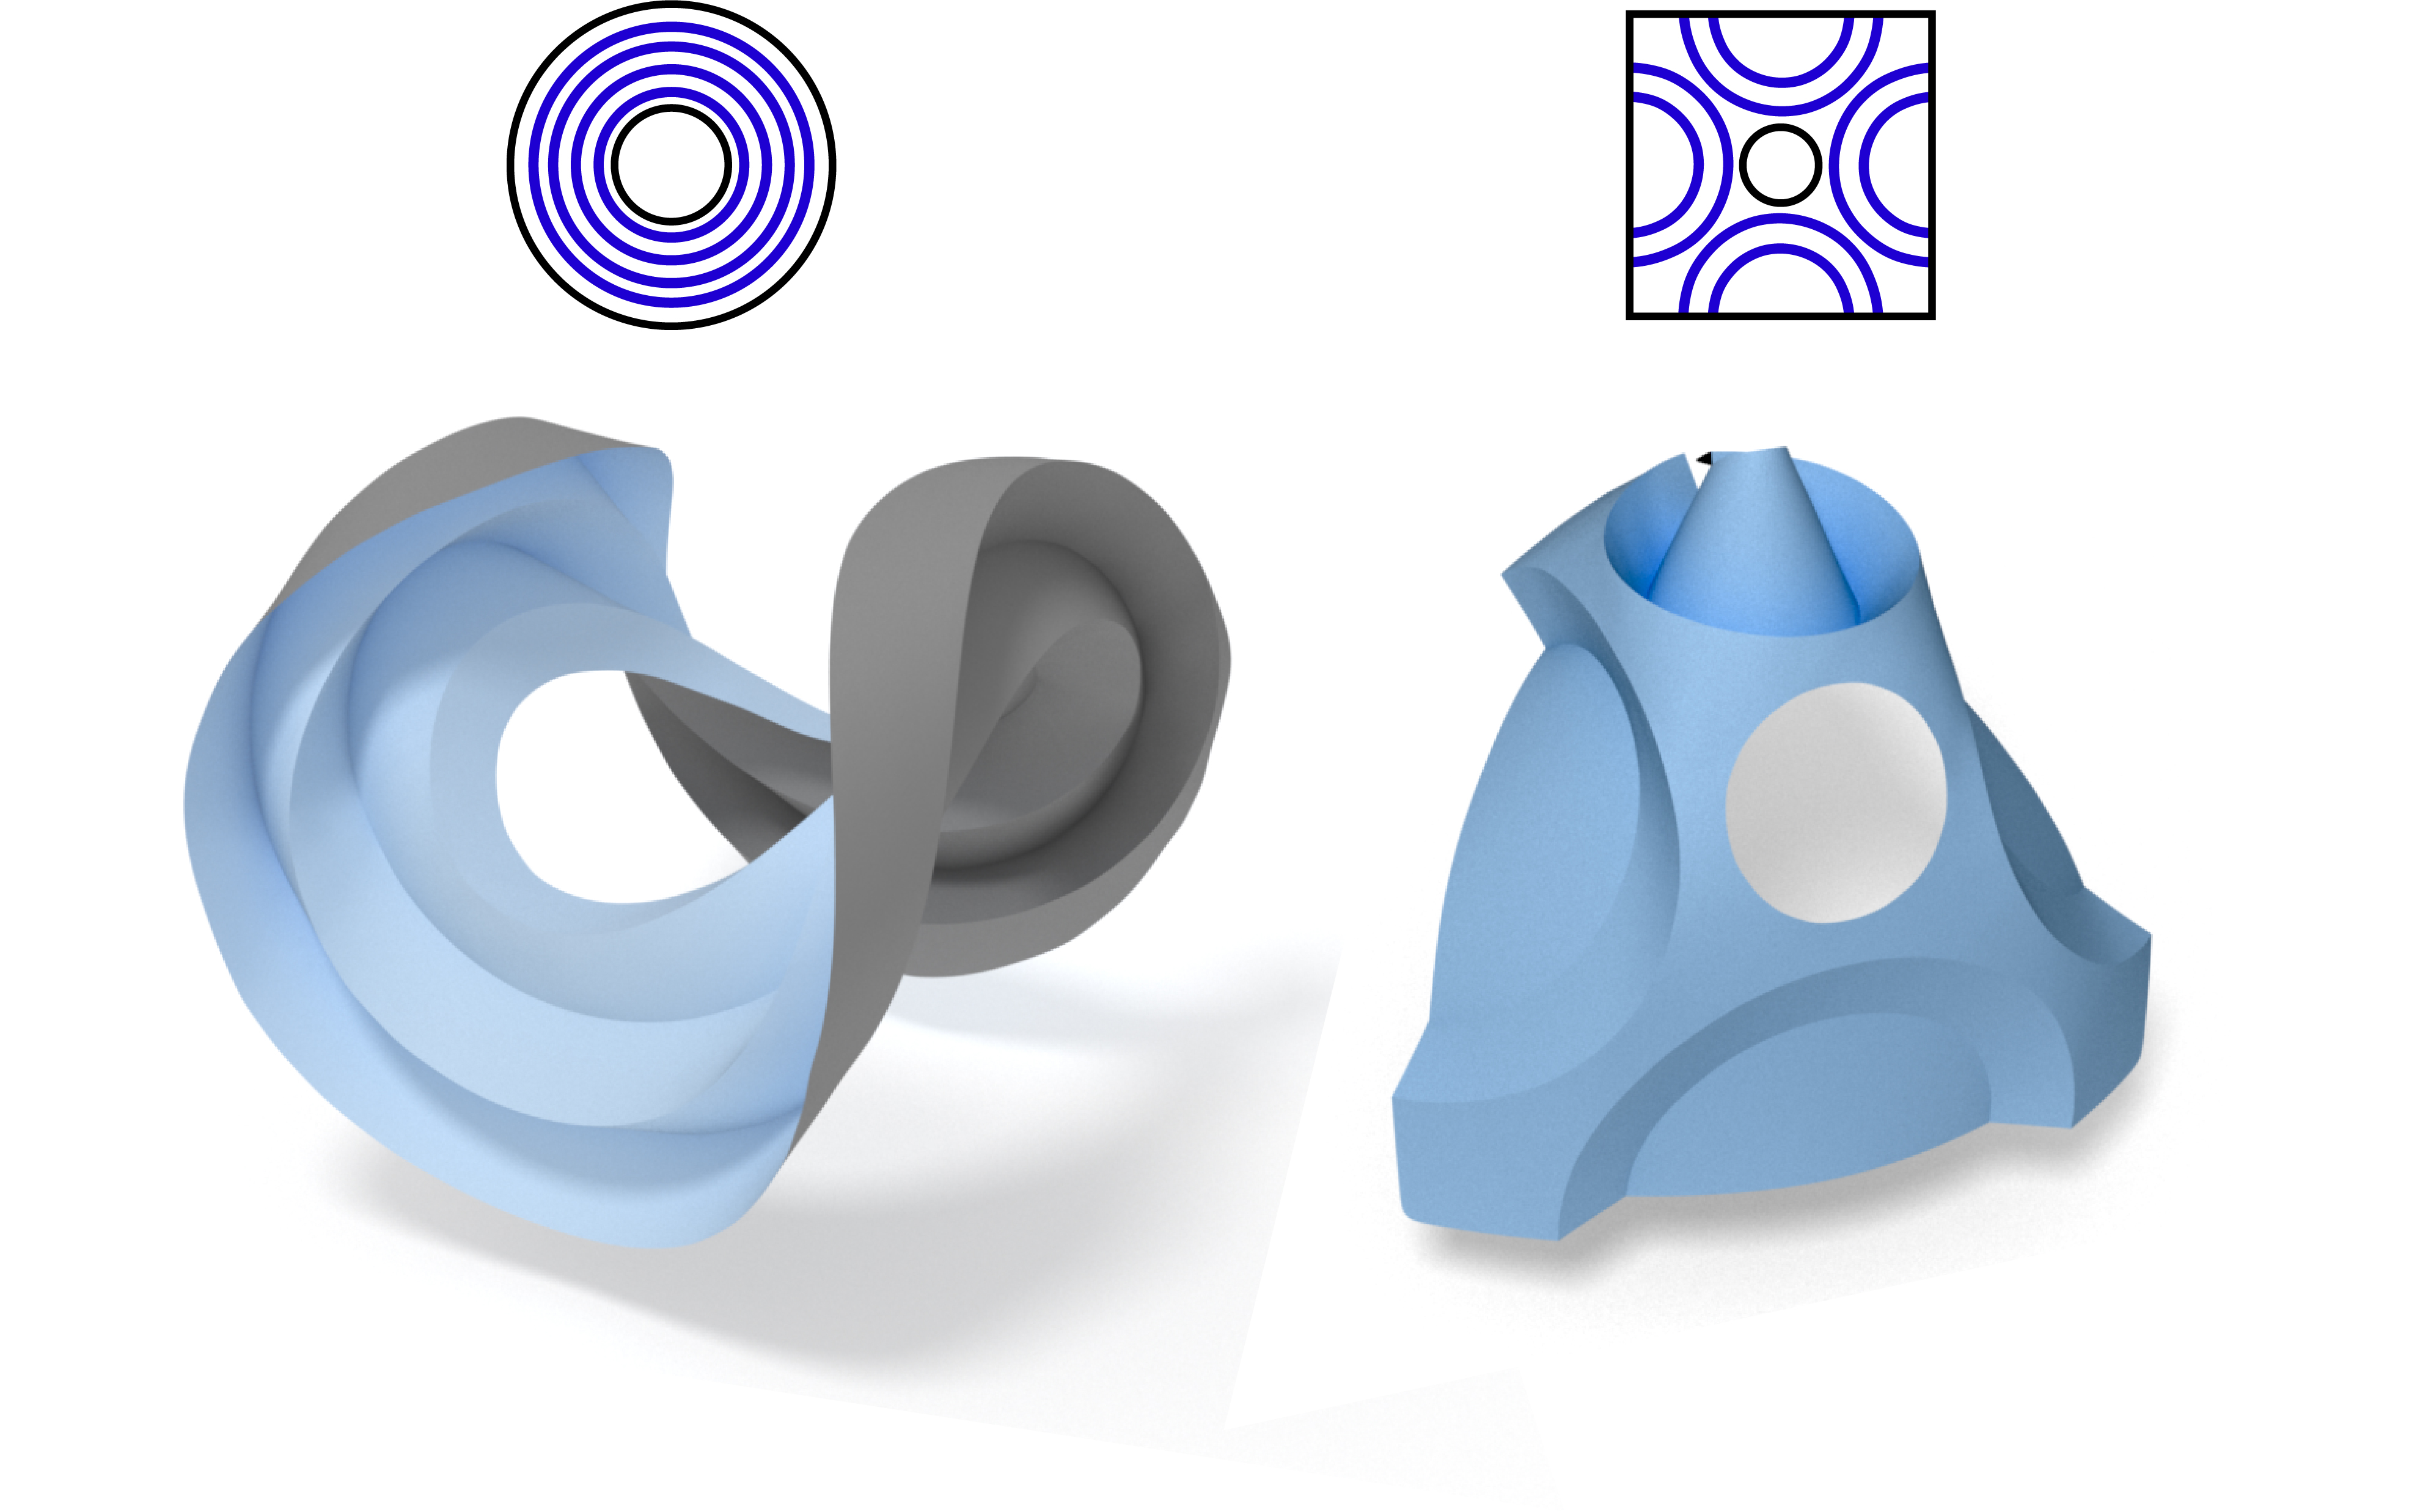 Modeling Curved Folding with Freeform Deformations